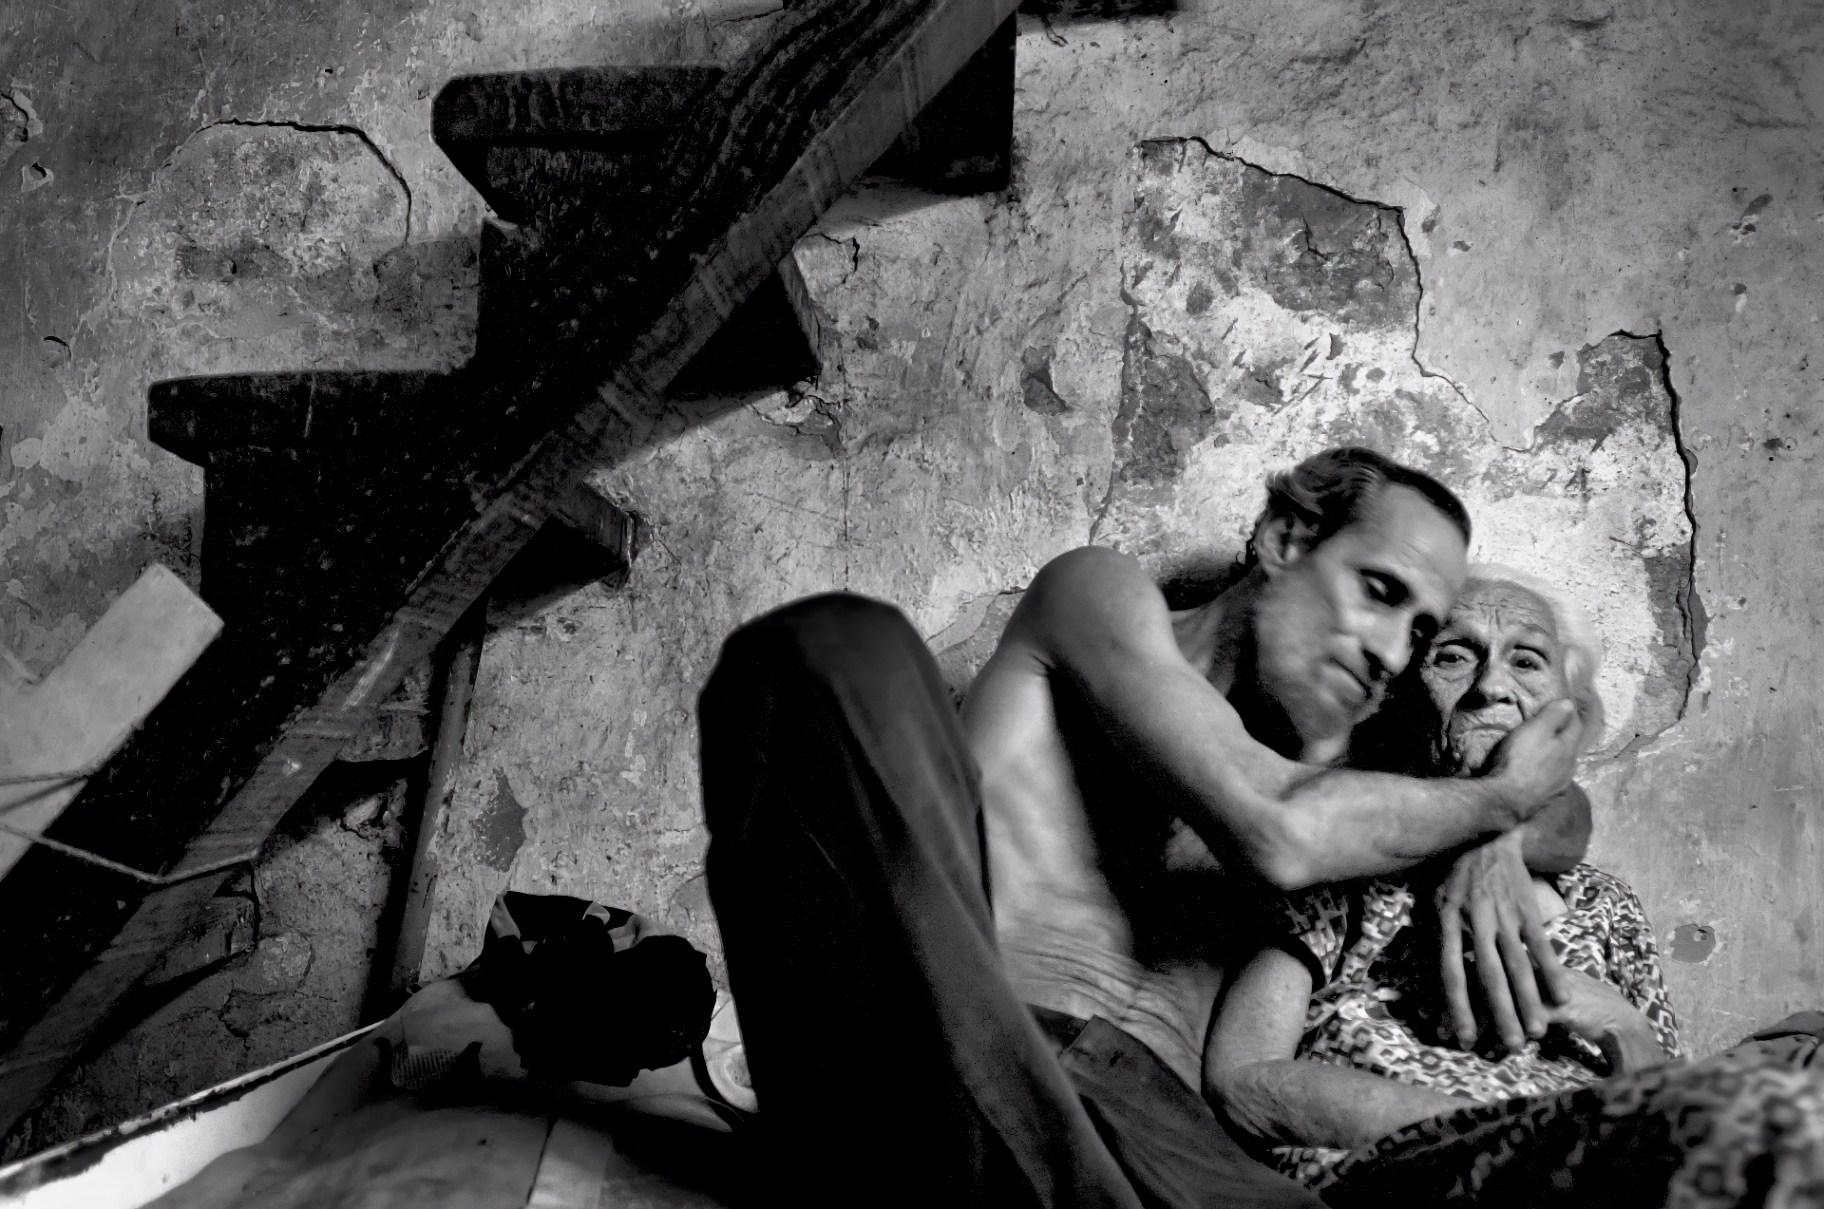 An impoverished mother and son embrace in Garcia’s photo “Love of the Son.” (Courtesy of Alex Garcia)